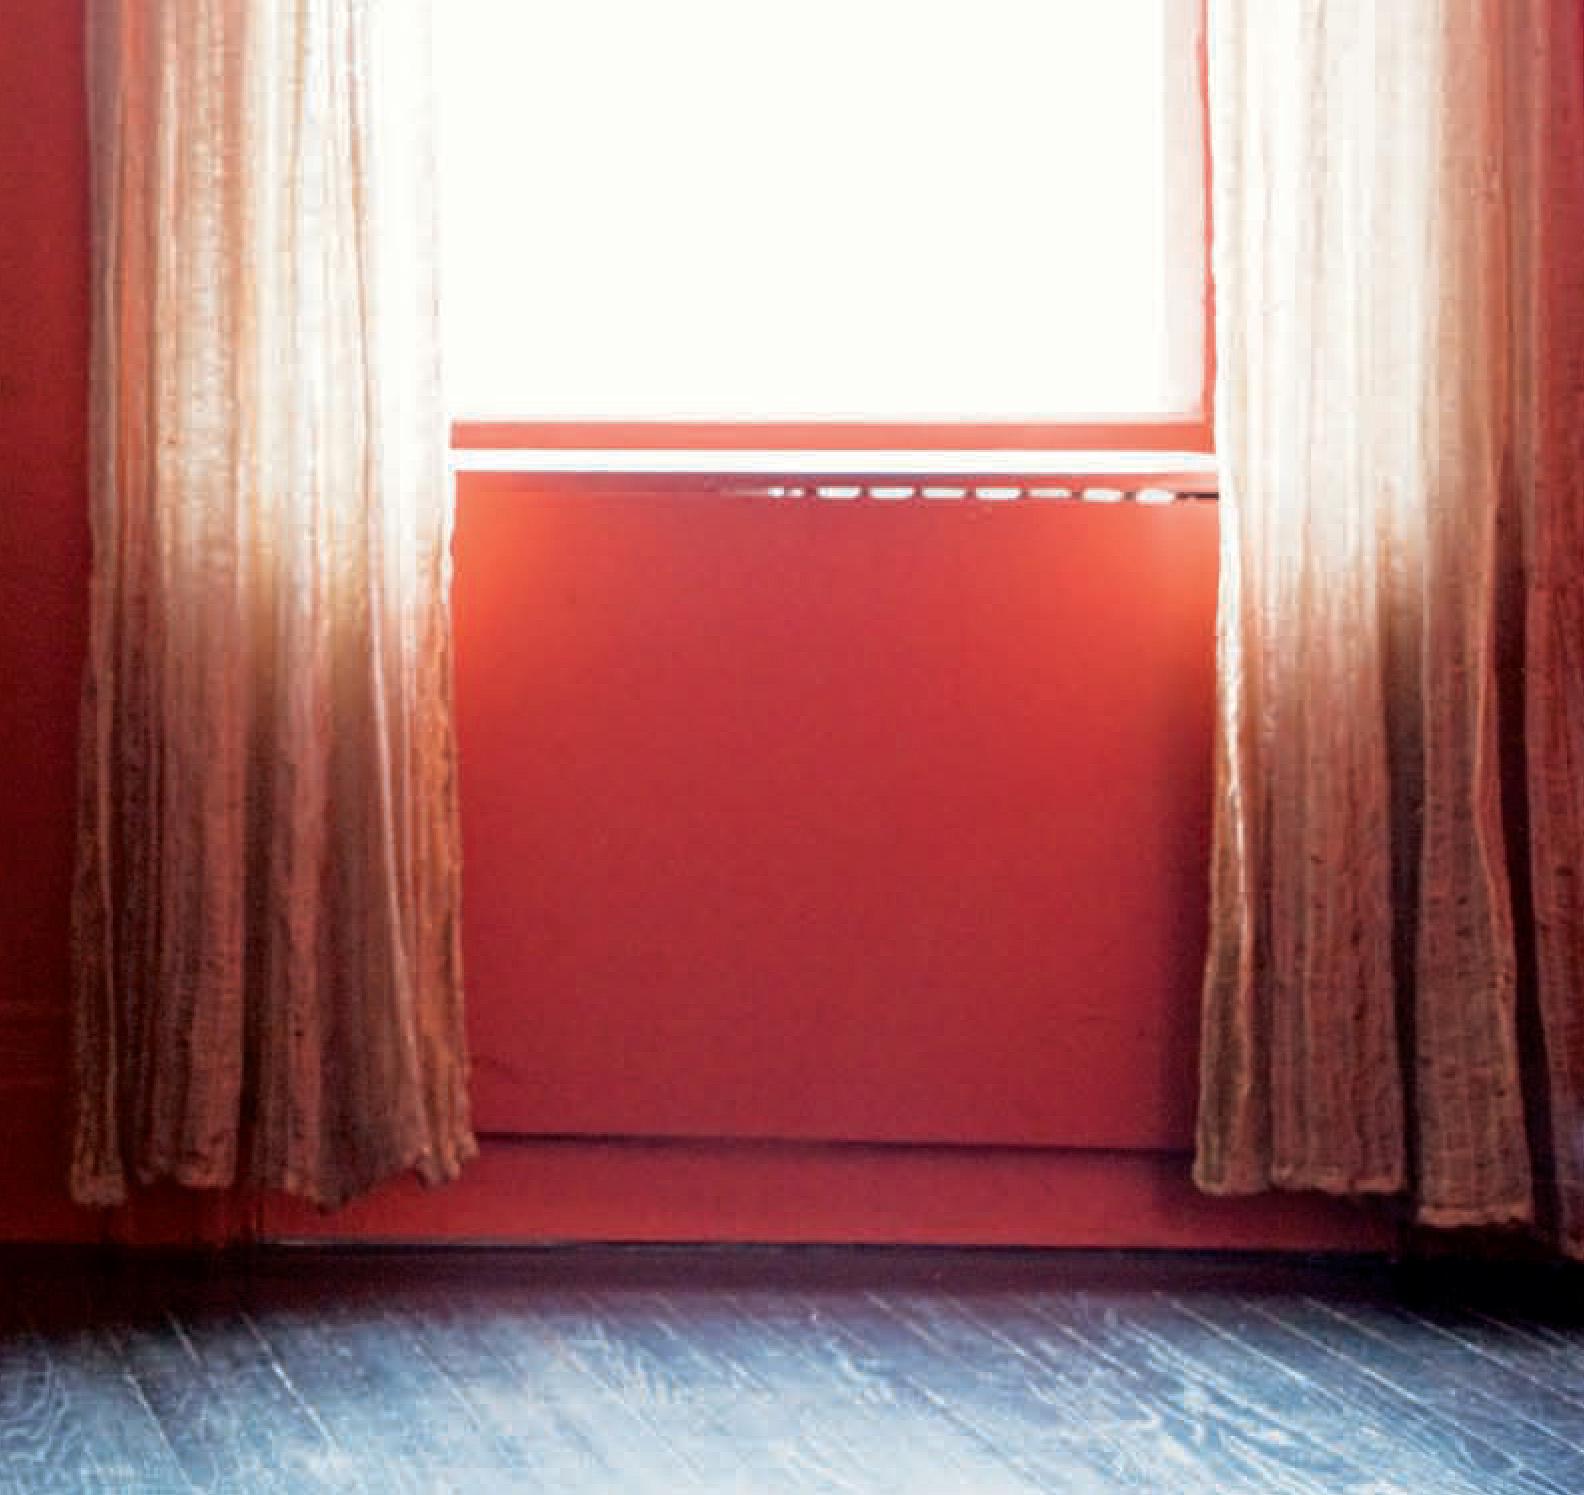 Hotel Chelsea, New York. Room 1024 - Contemporary Photograph by Victoria Cohen